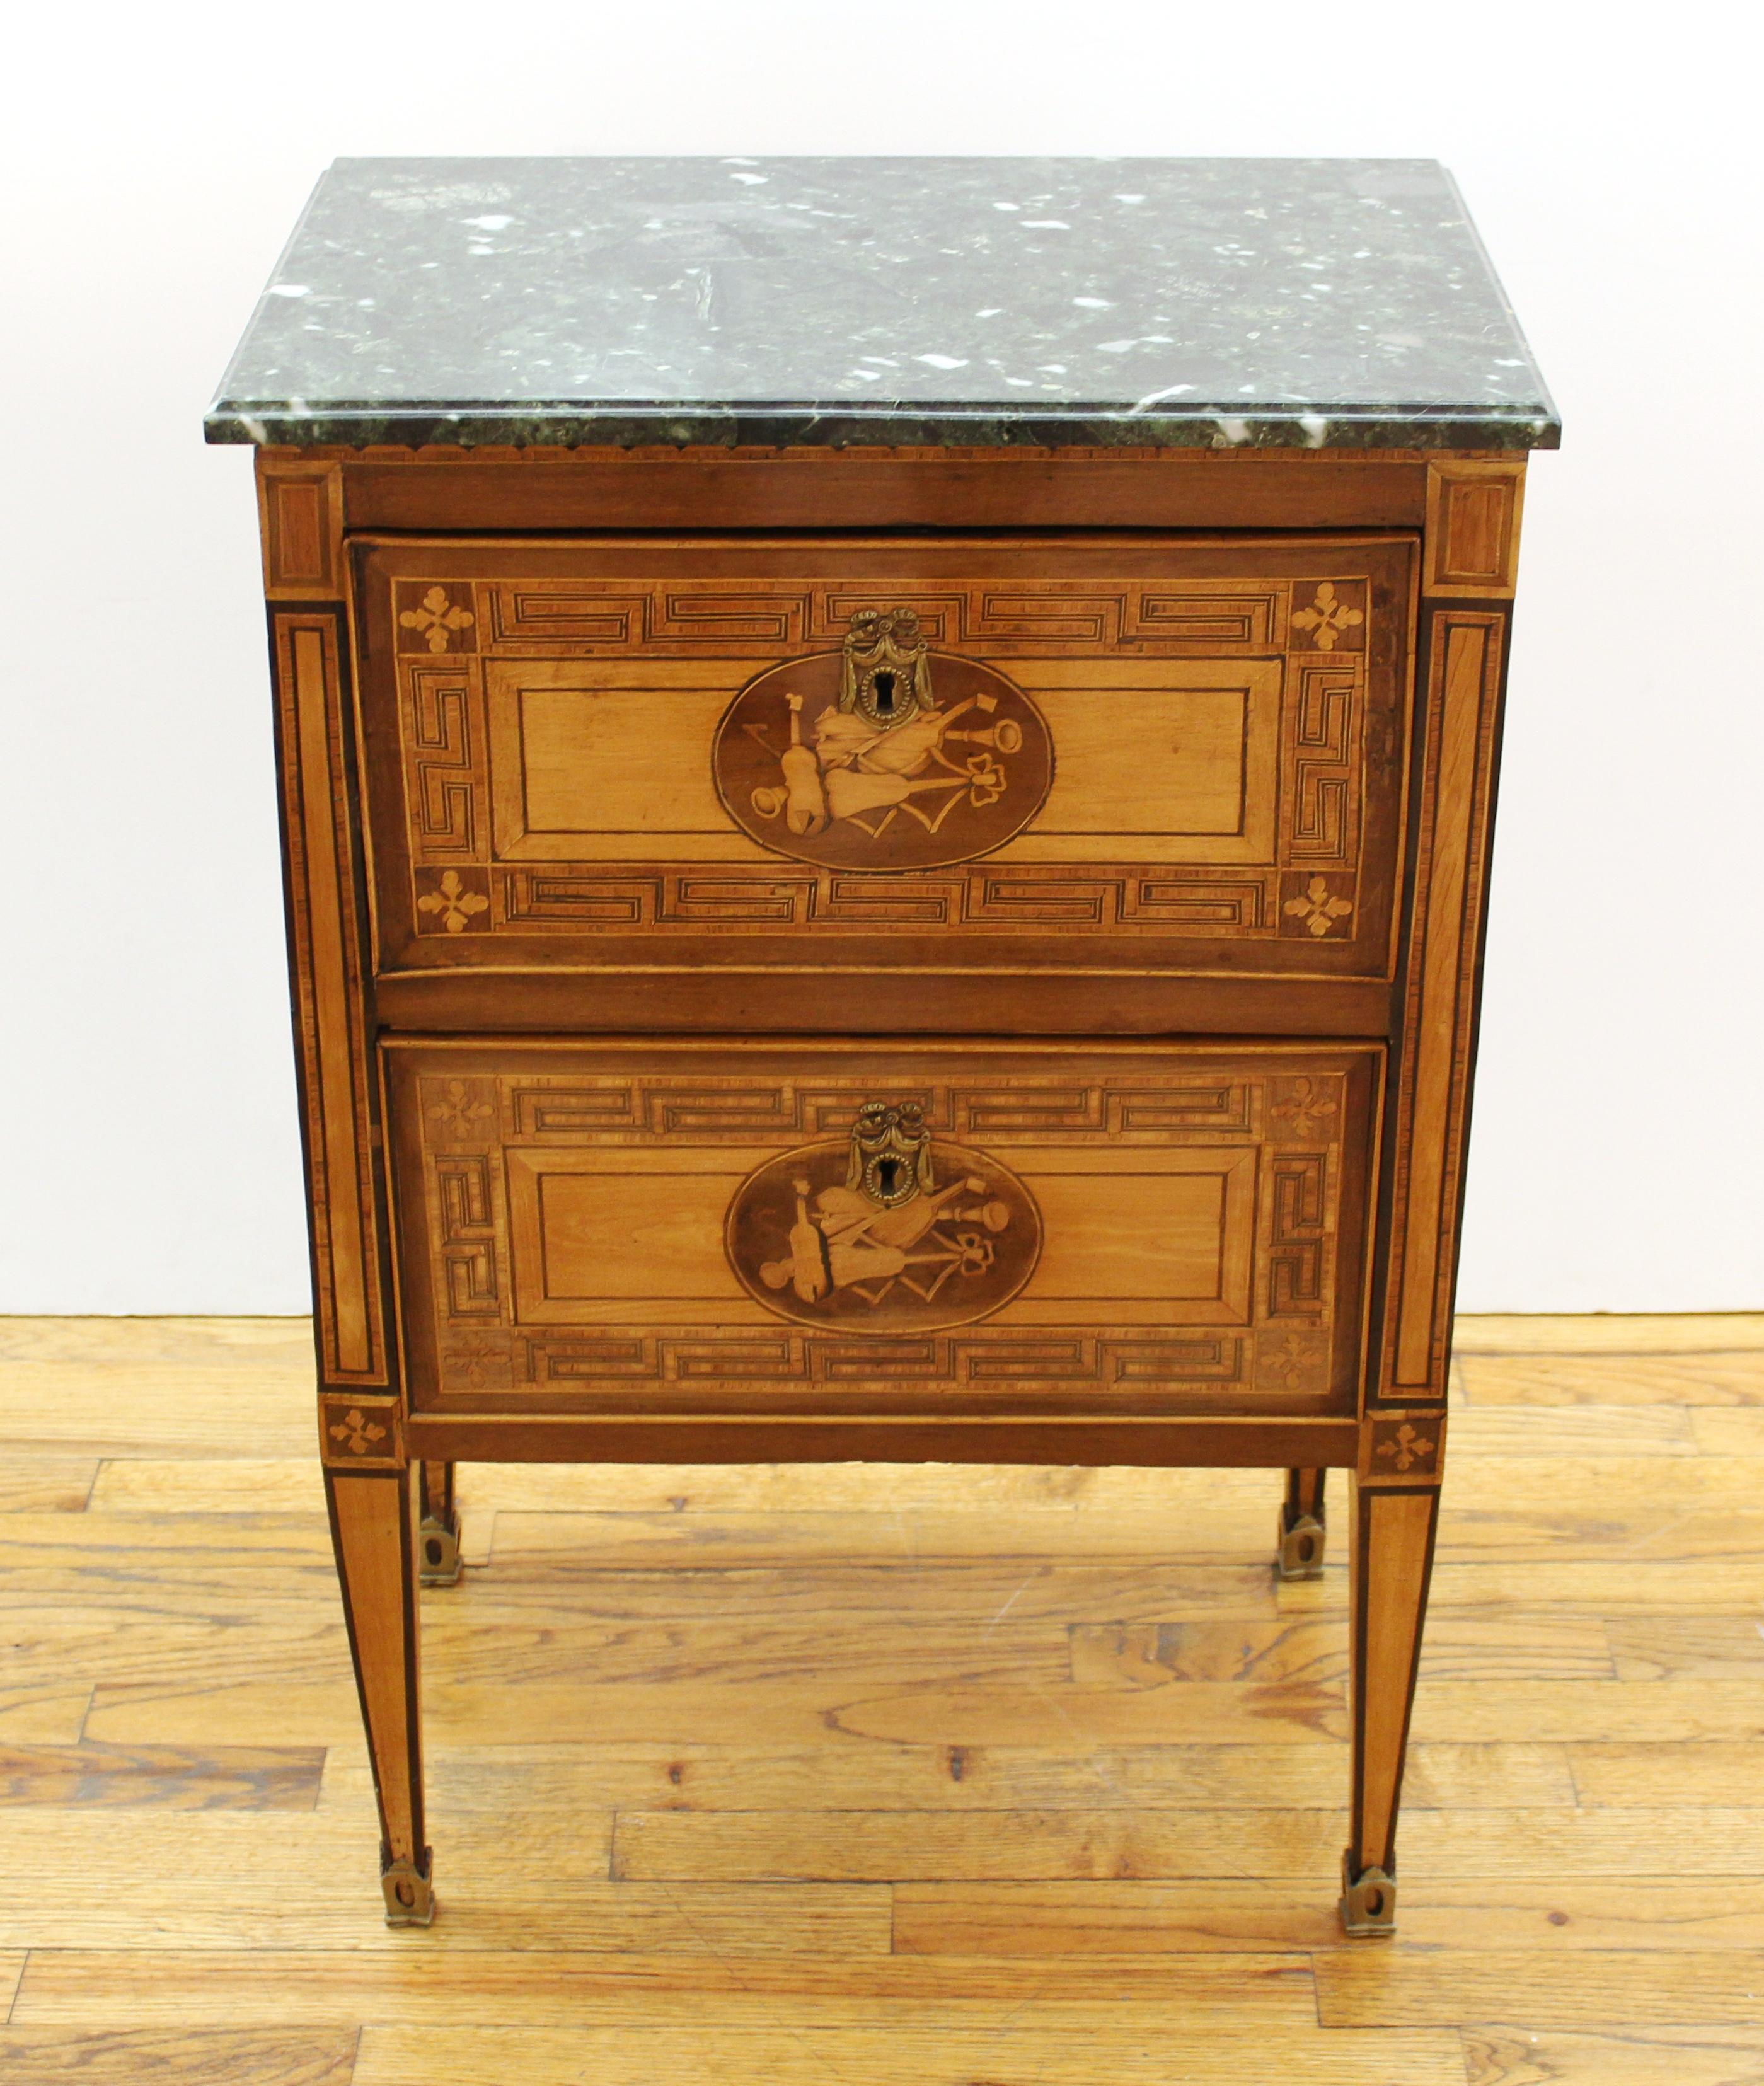 Marquetry Italian Neoclassical Inlaid Commodino Cabinet with Marble Top